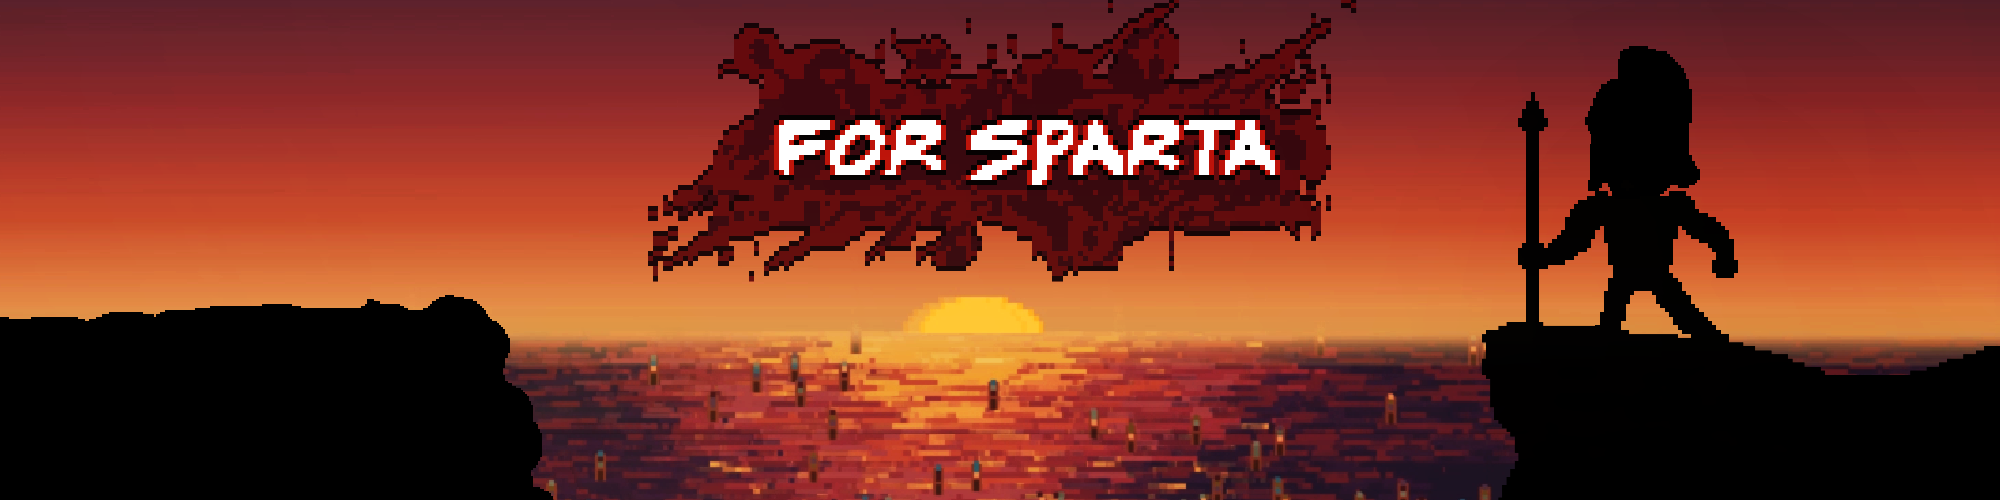 For Sparta